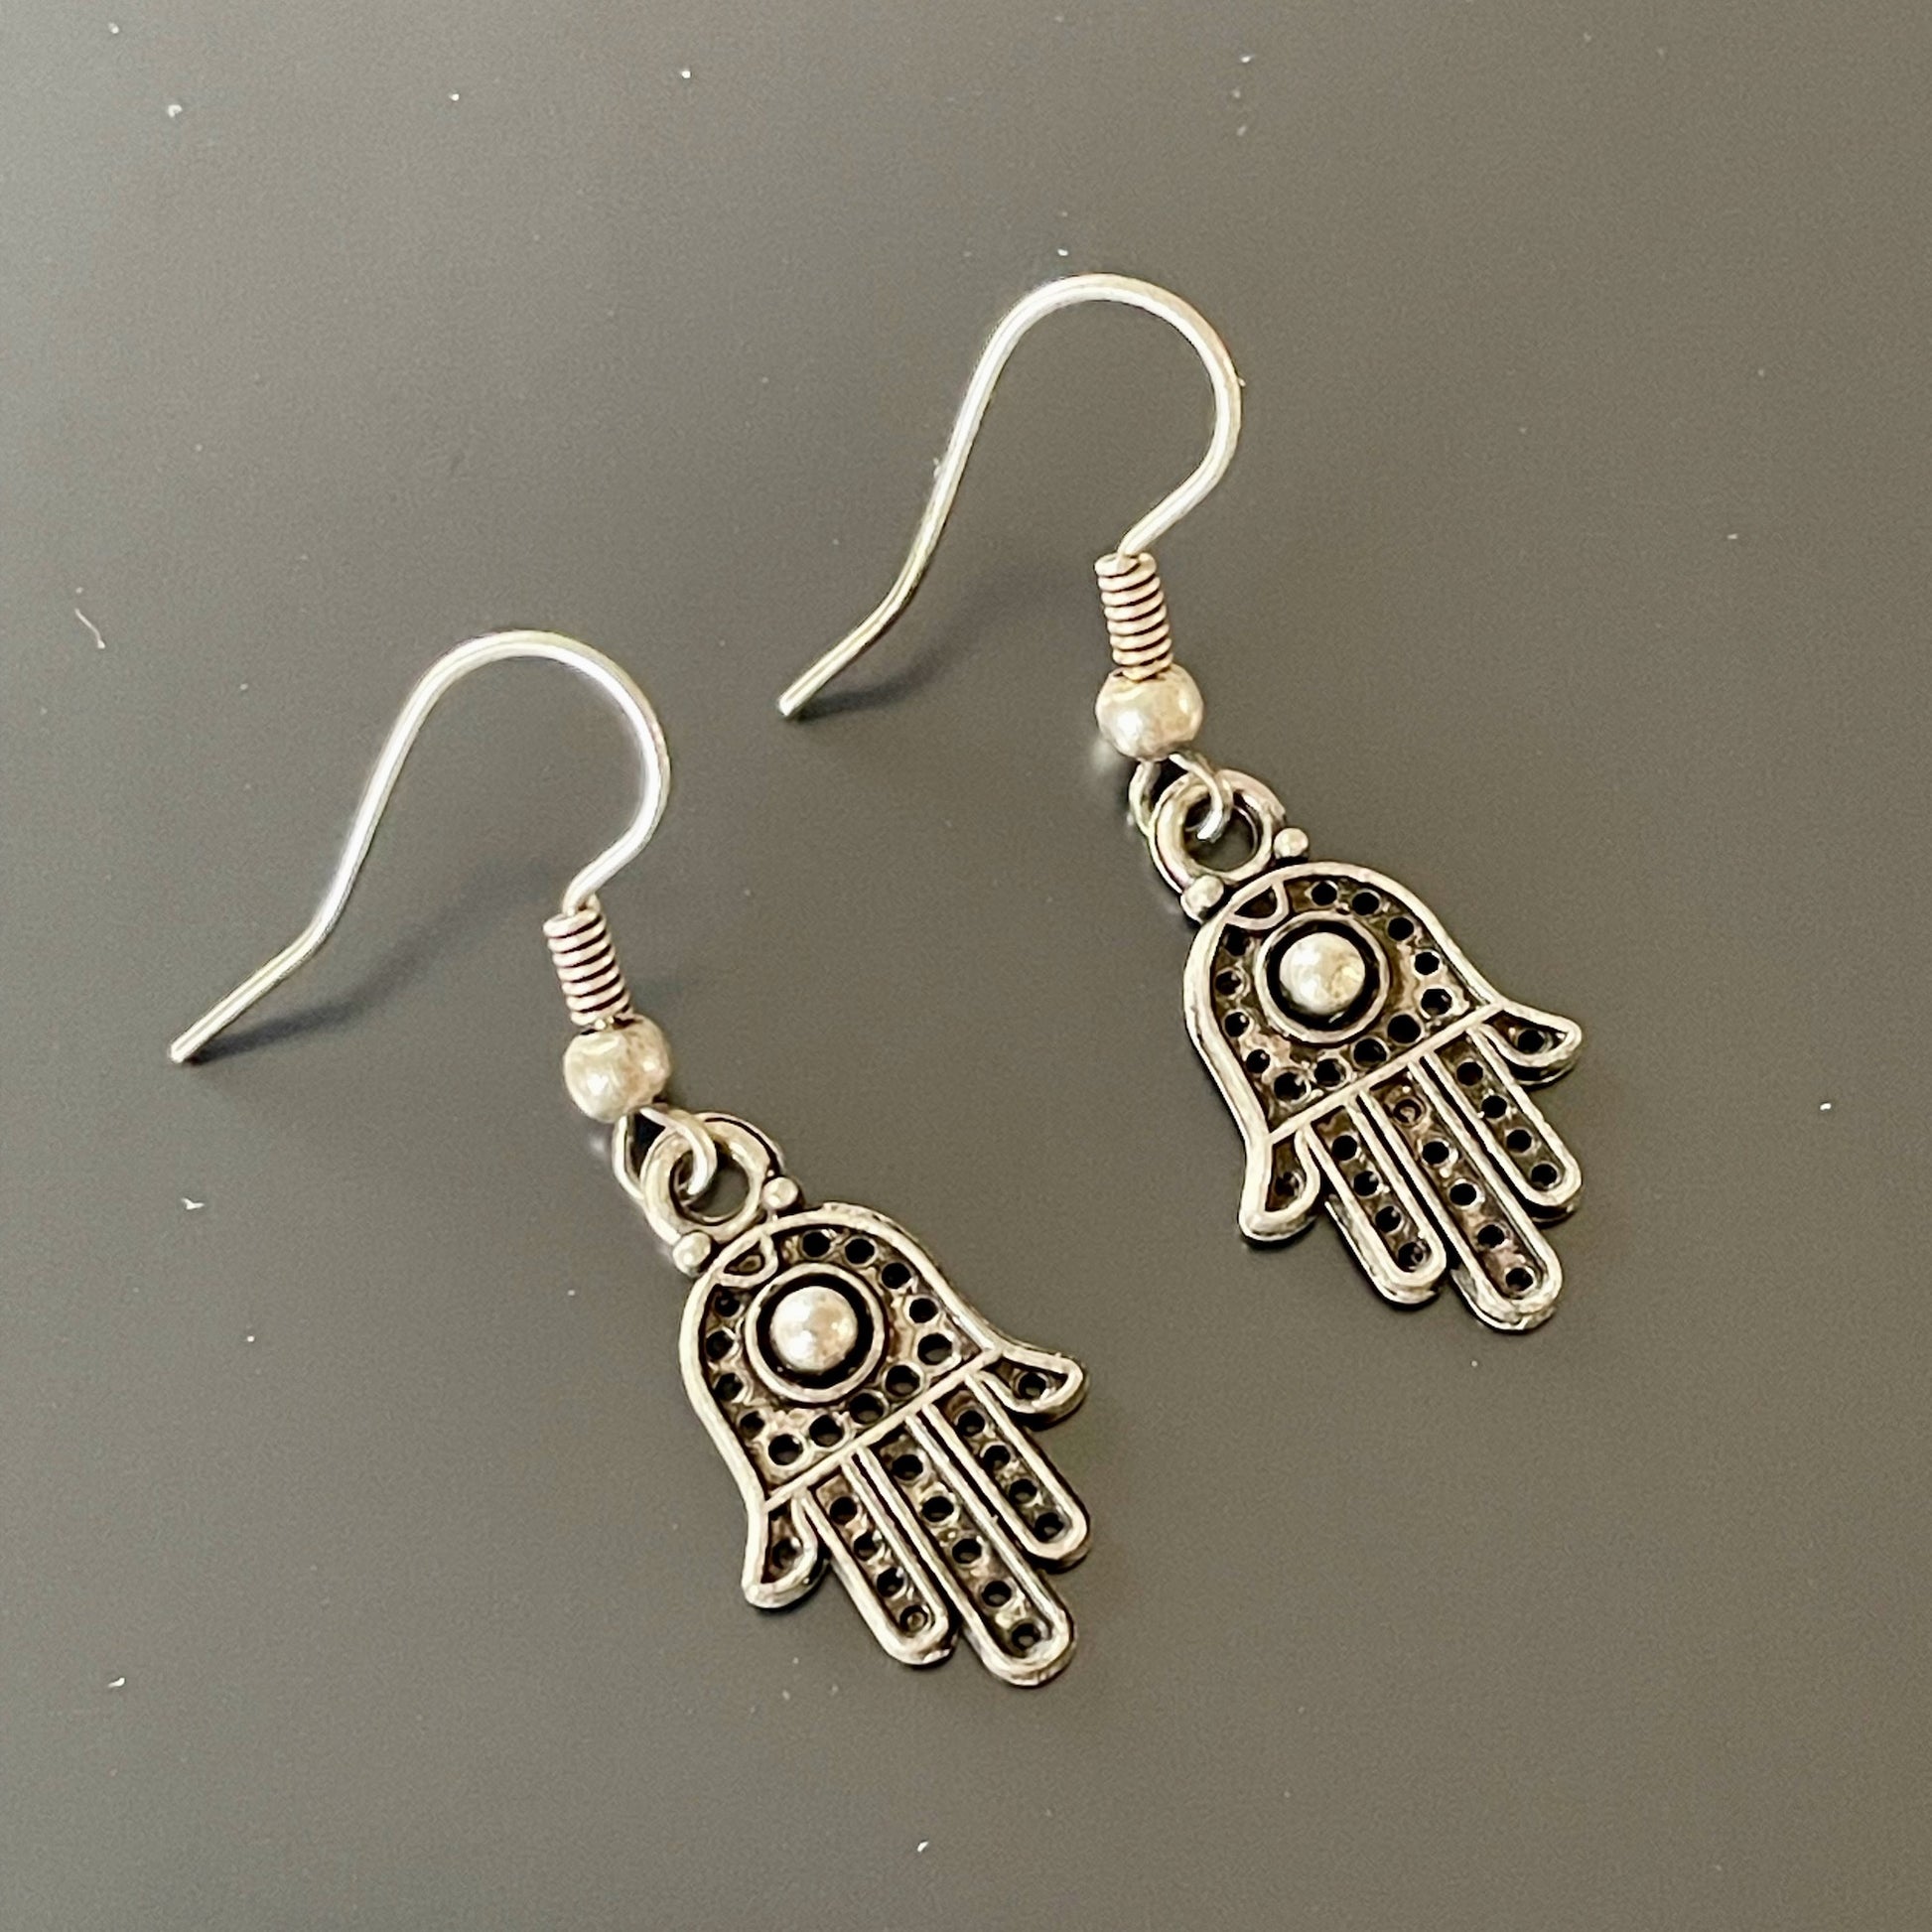 Hand of Fatima Small Drop Earrings with Ball Detail